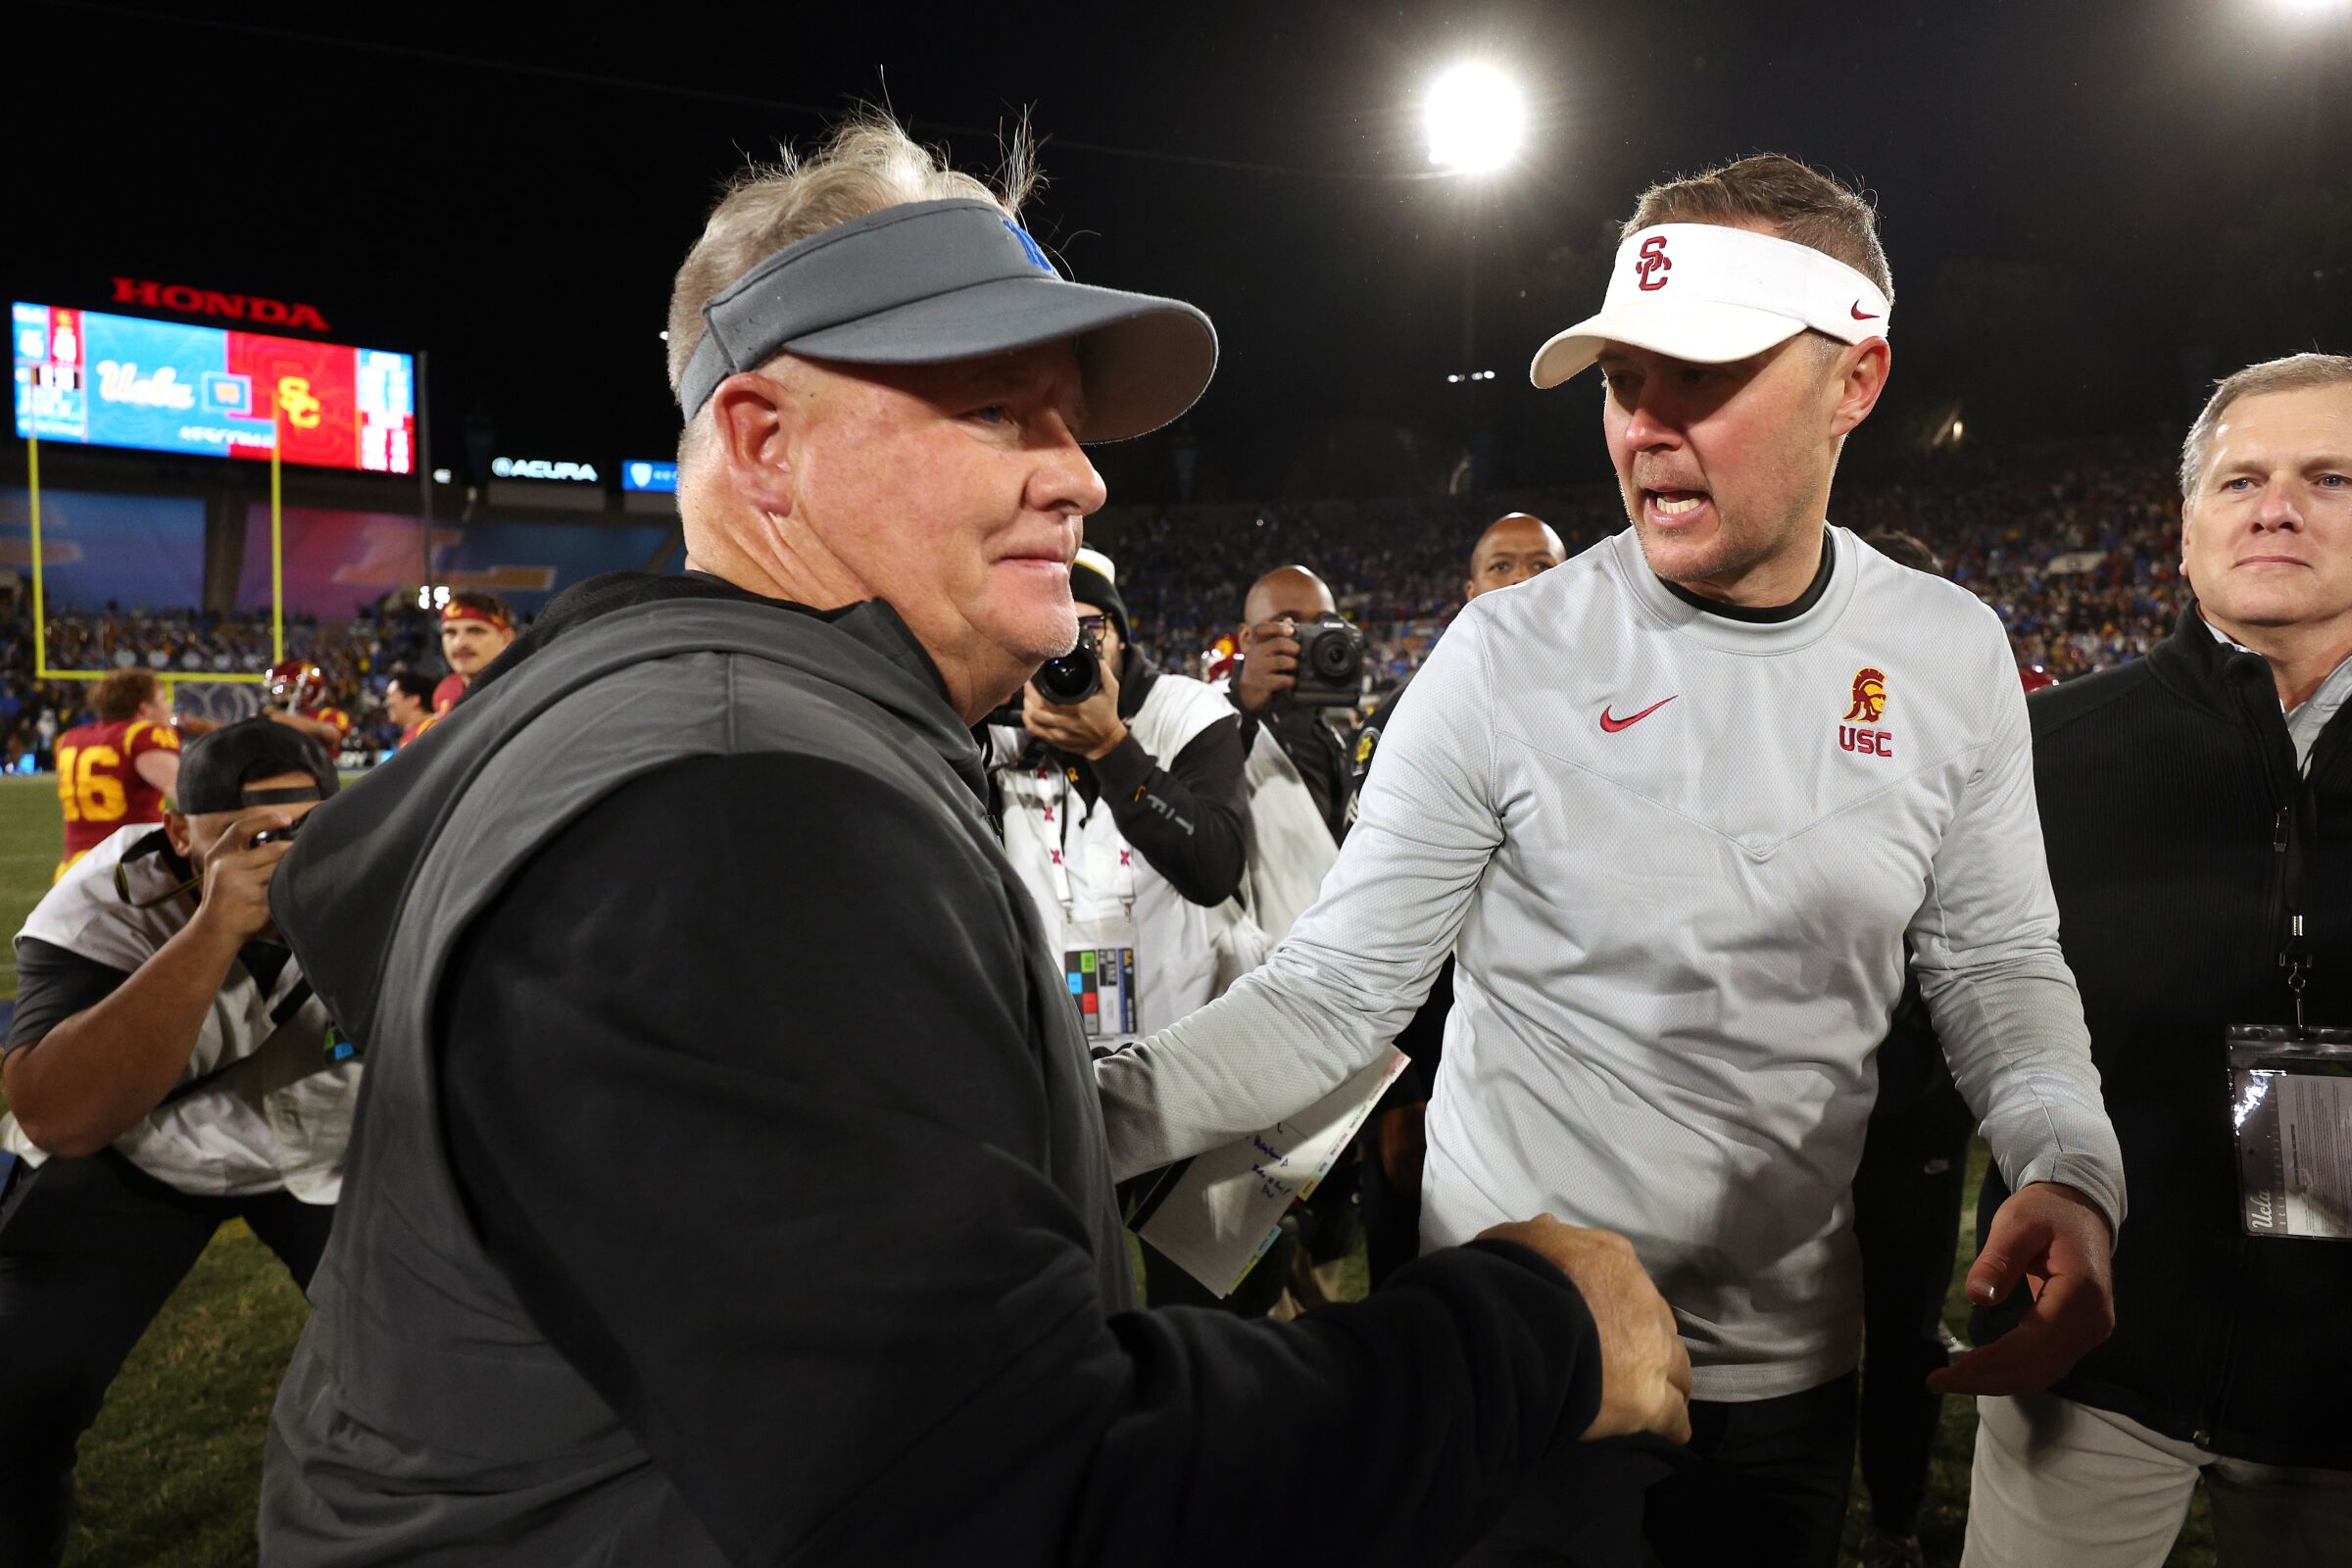 UCLA coach Chip Kelly shakes hands with USC coach Lincoln Riley after a game